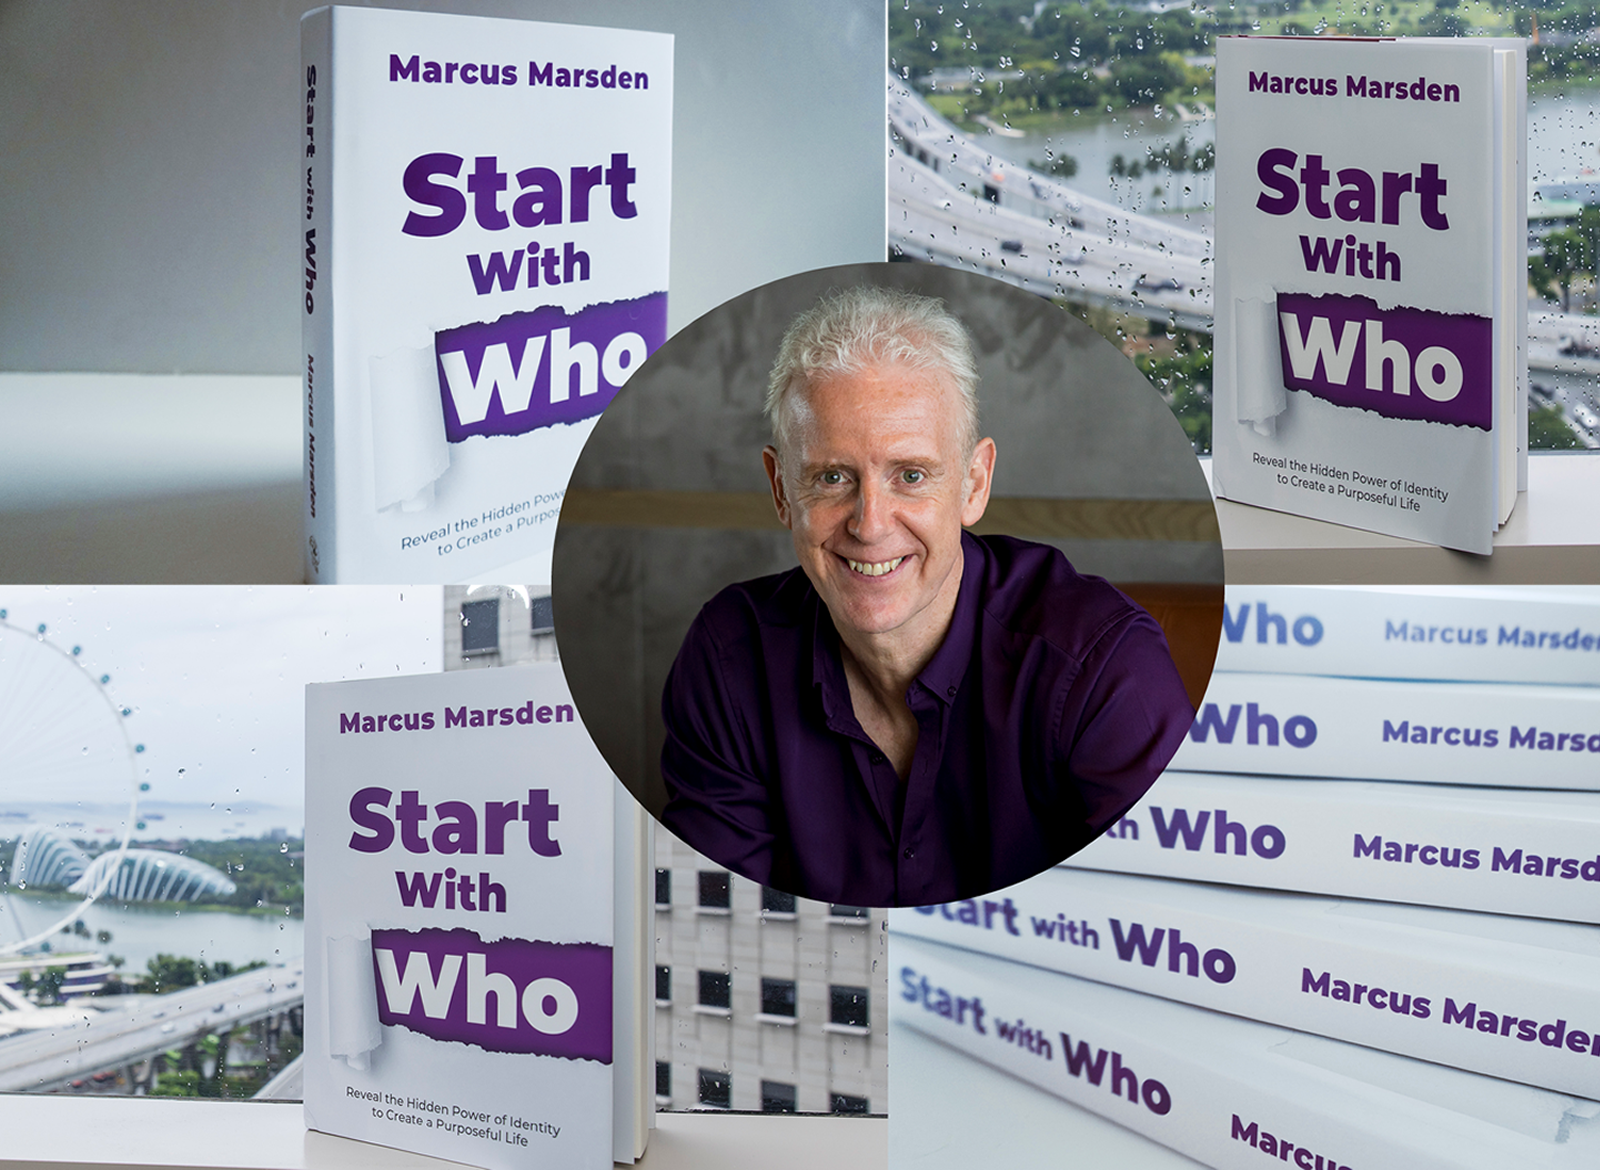 Start with WHO book by Marcus Marsden